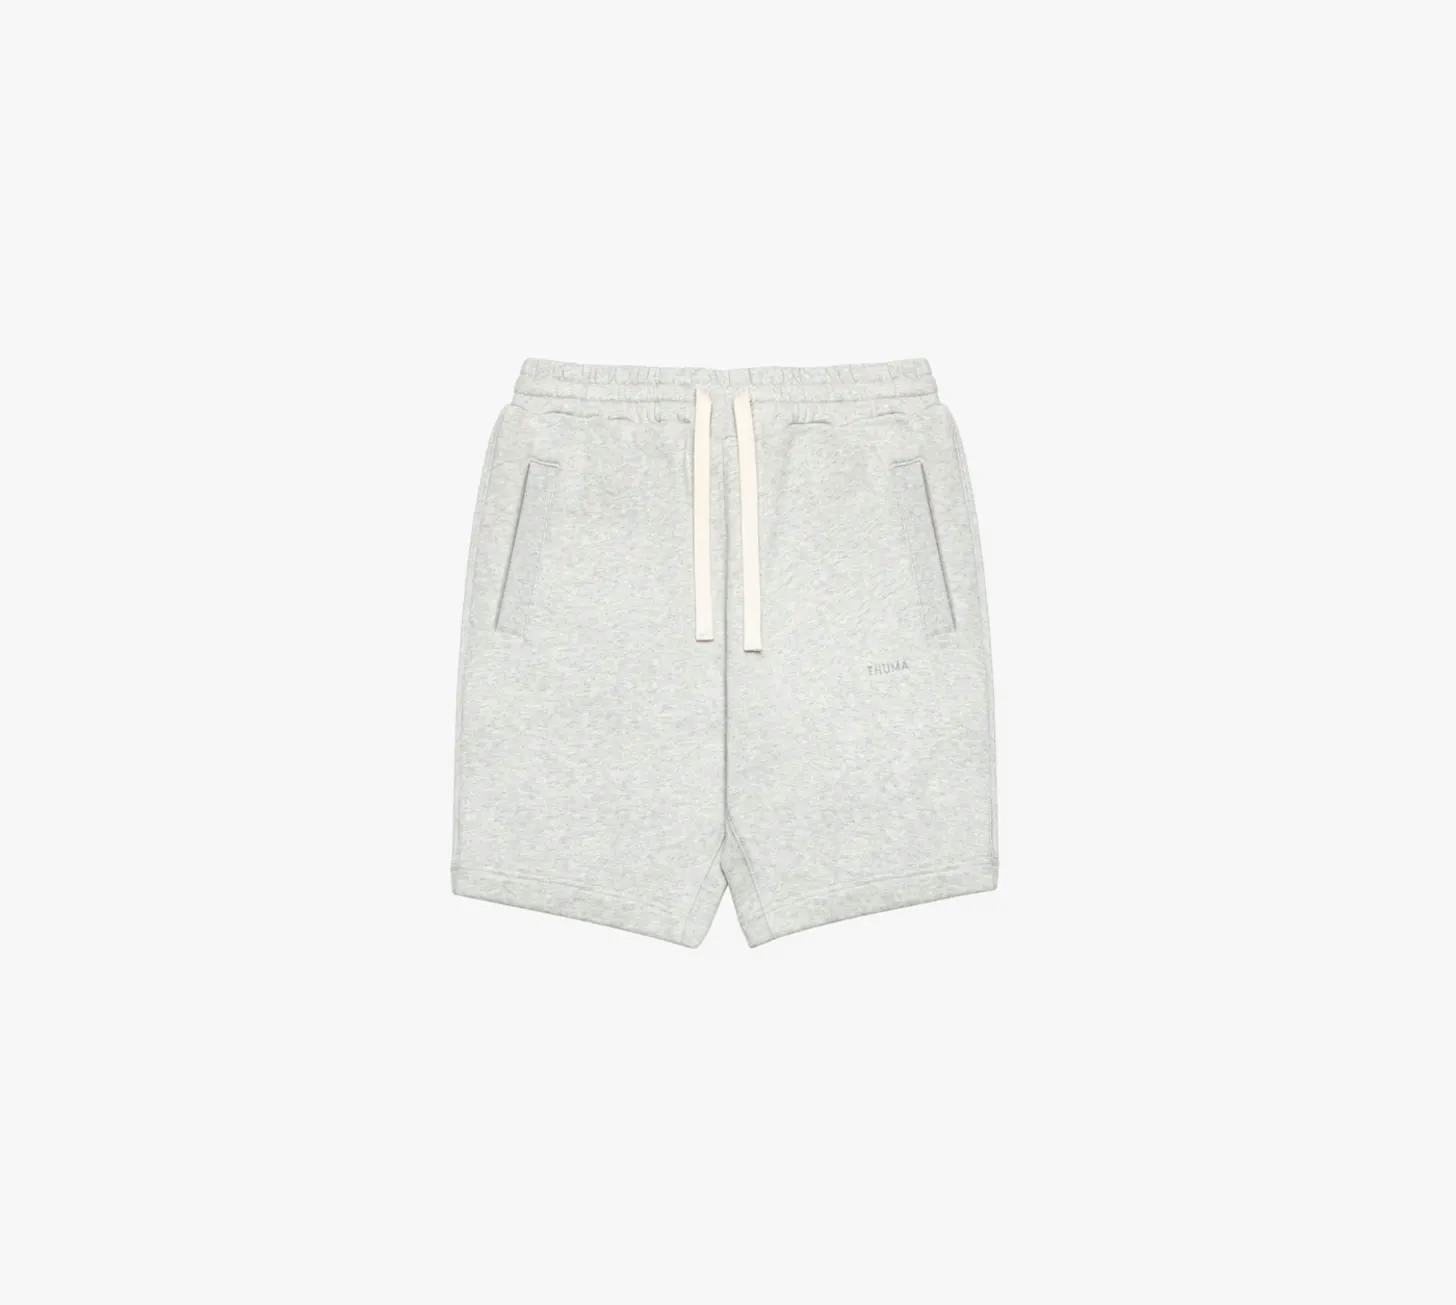 Lounge & Leisure Shorts - Front